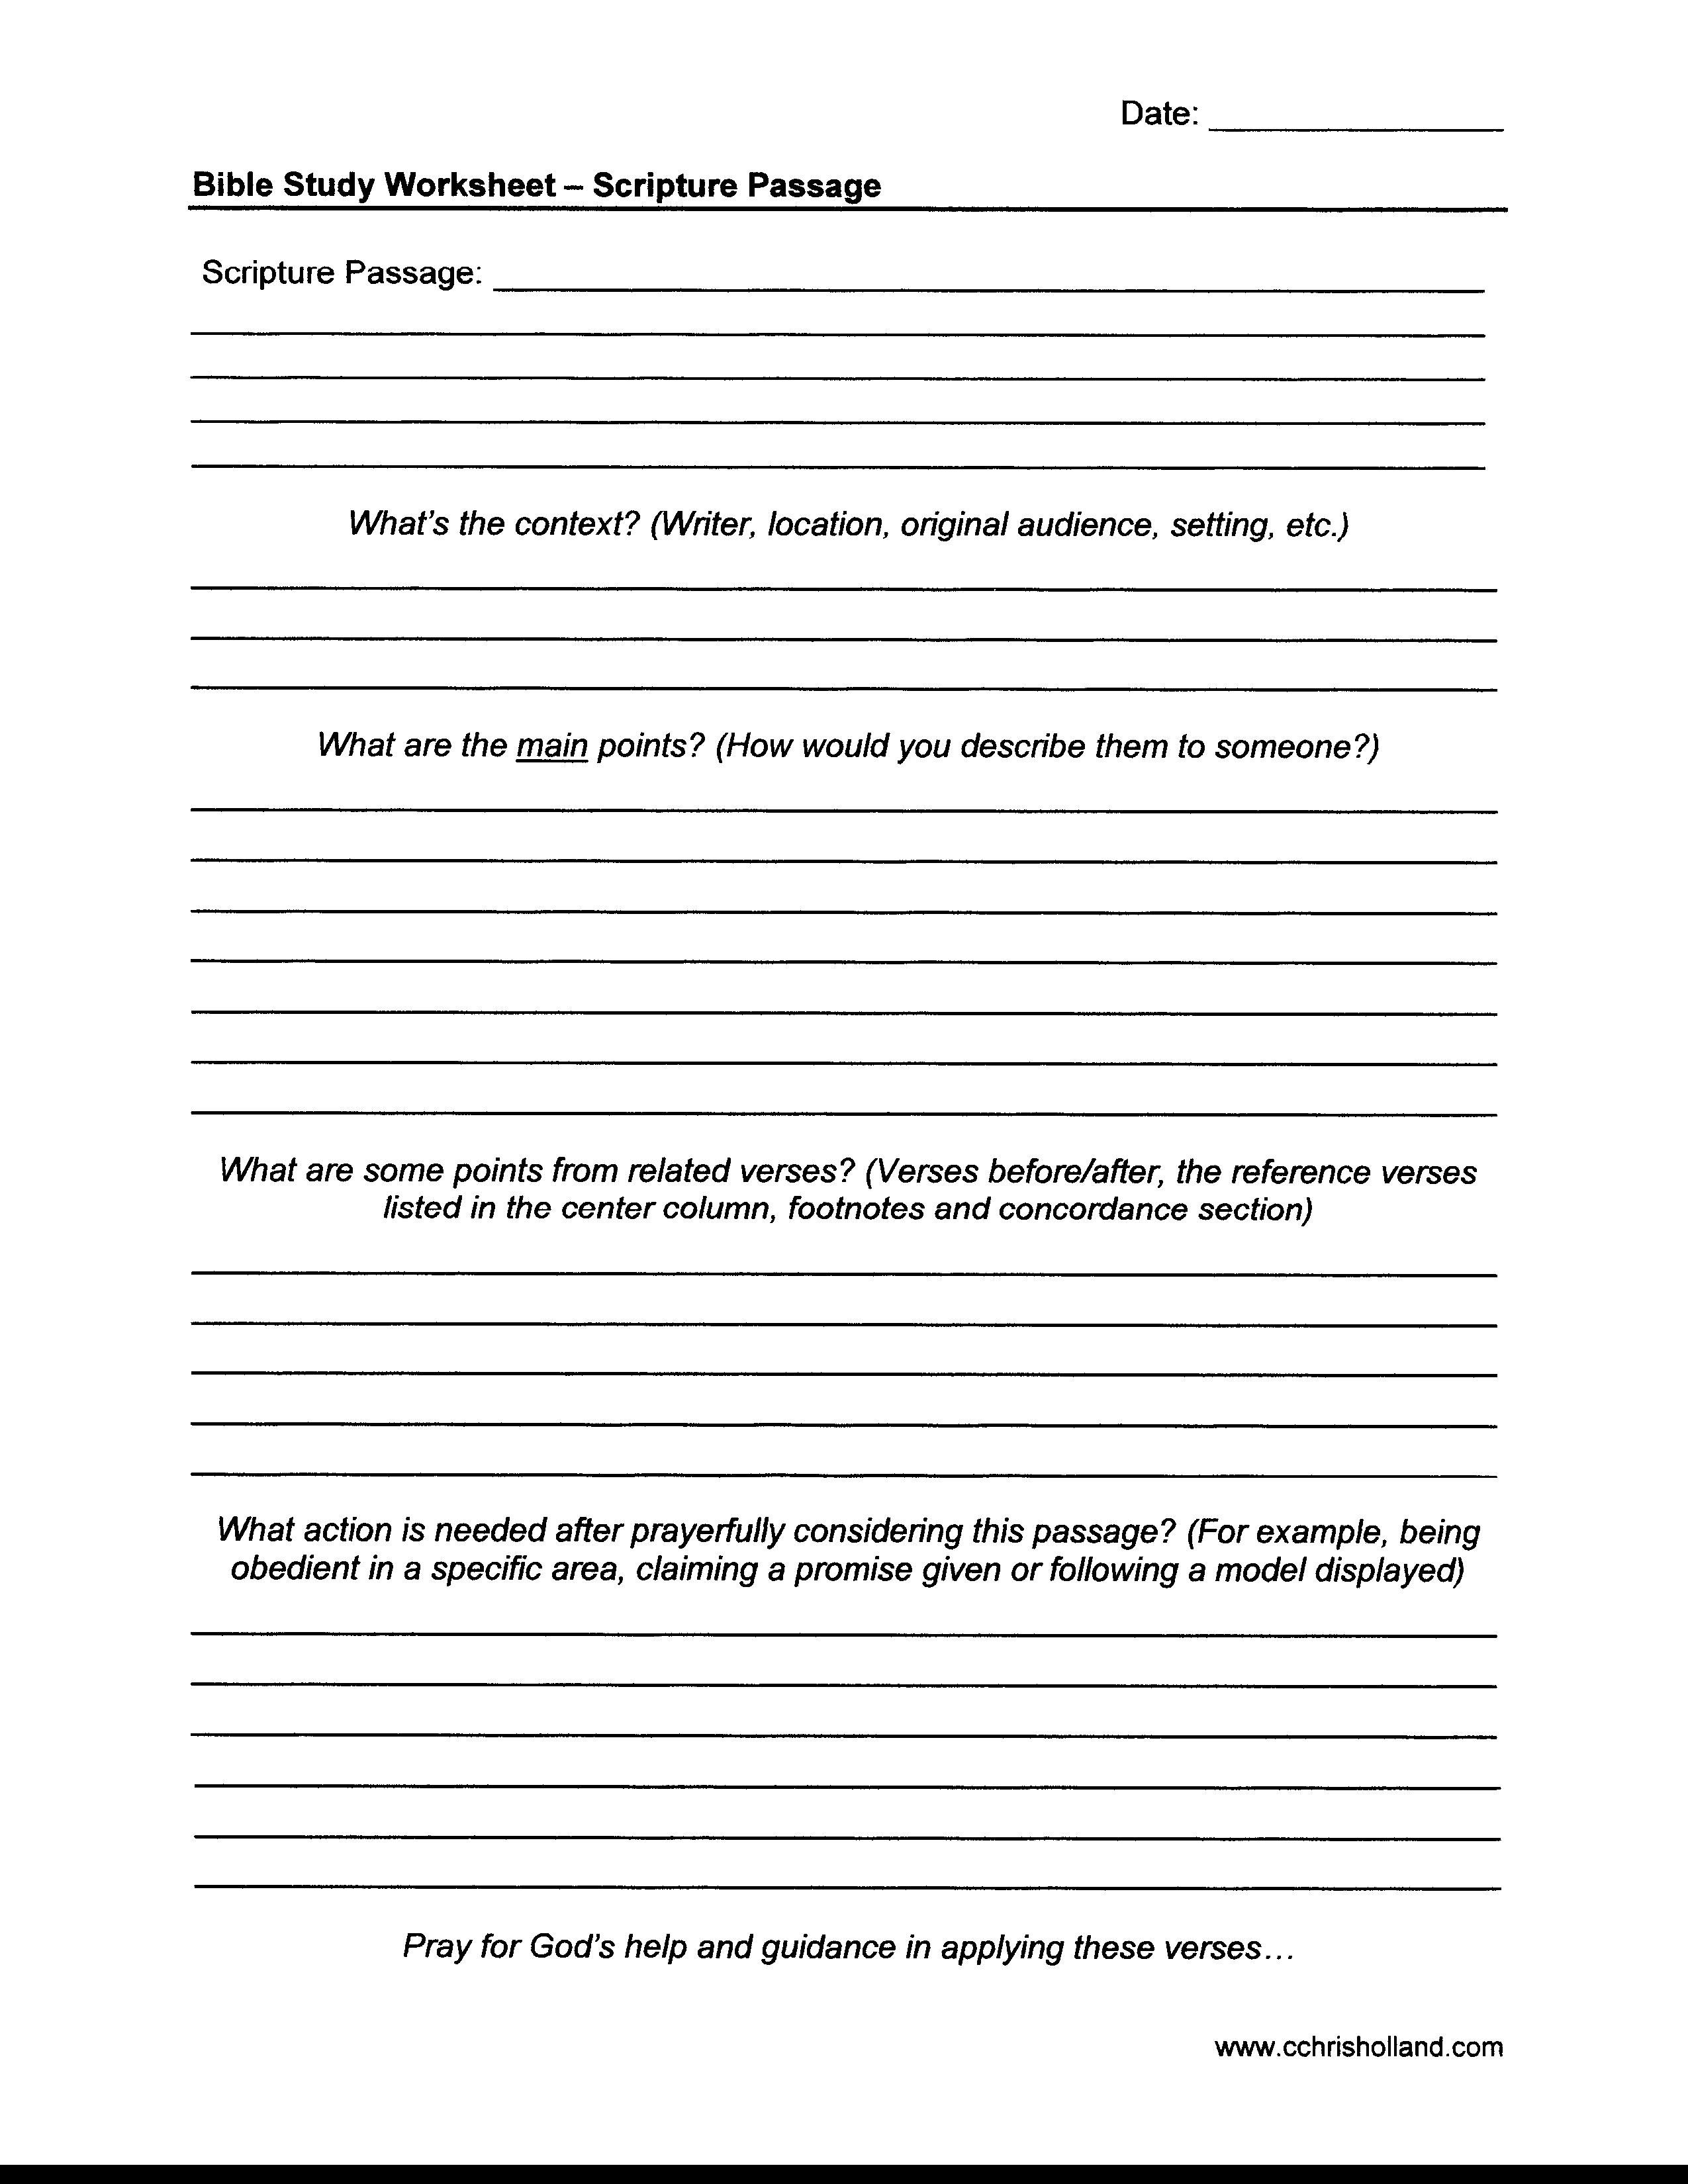 free-printable-youth-bible-study-lessons-bible-worksheets-pdf